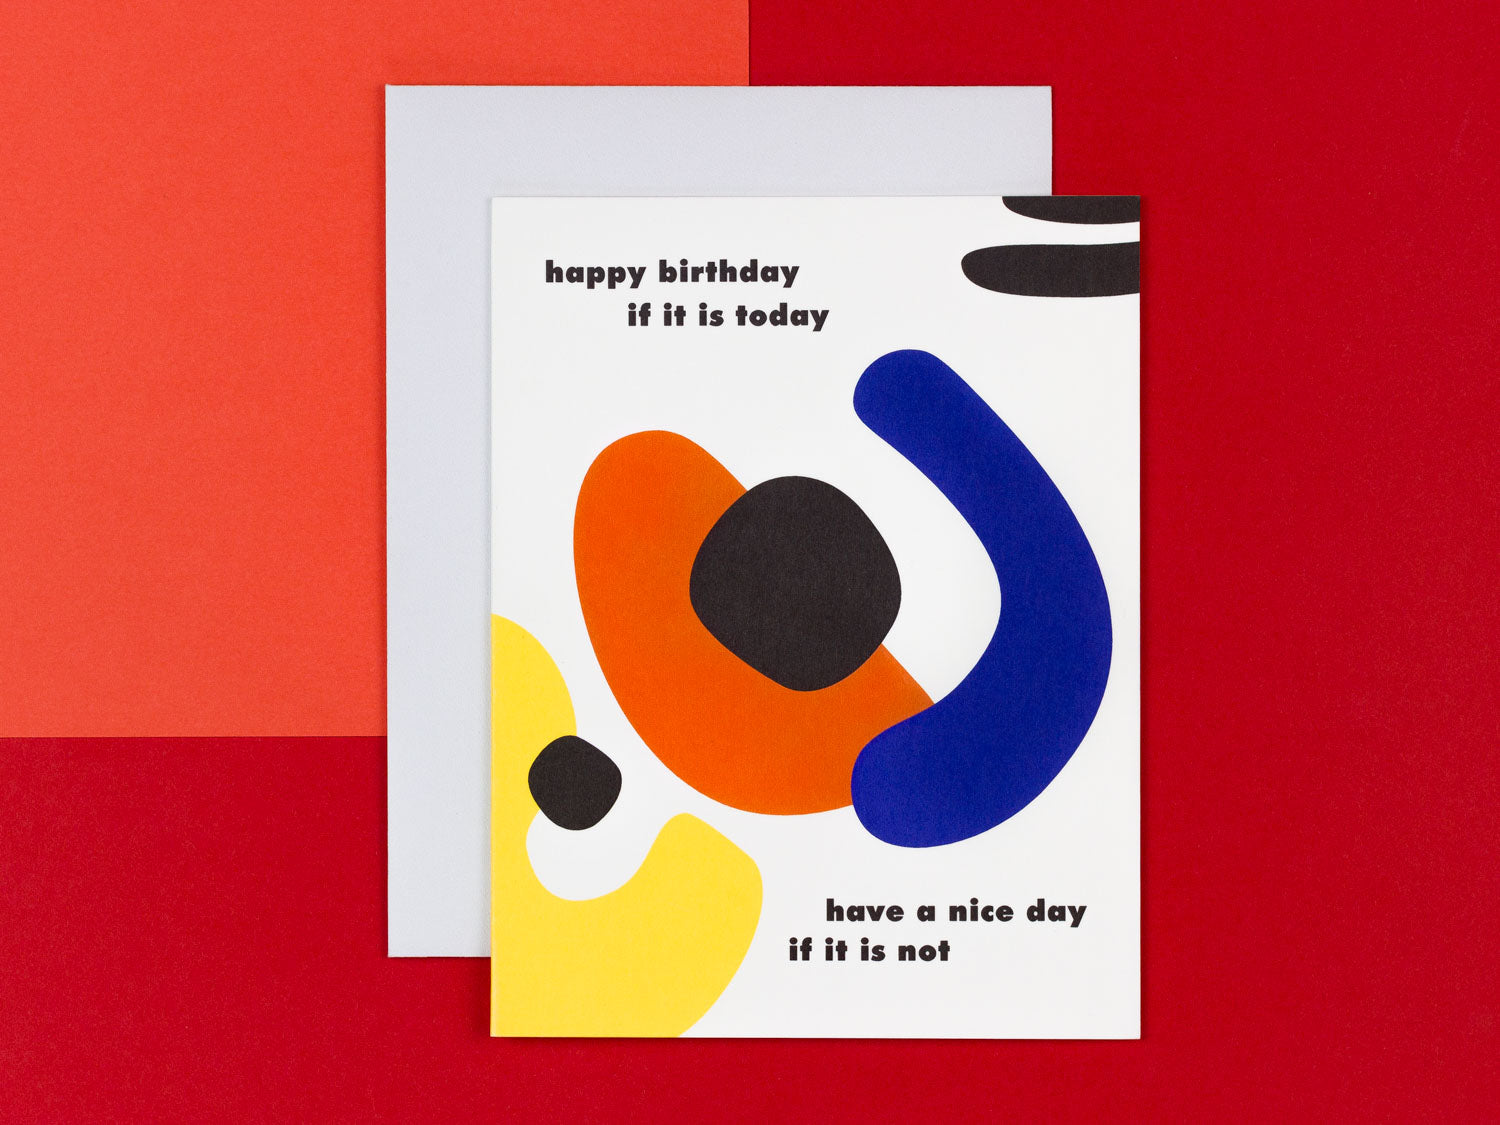 Happy Birthday If It Is Today Have A Nice Day If It Is Not. Funny birthday card with colorful abstract shapes by My Darlin' @mydarlin_bk